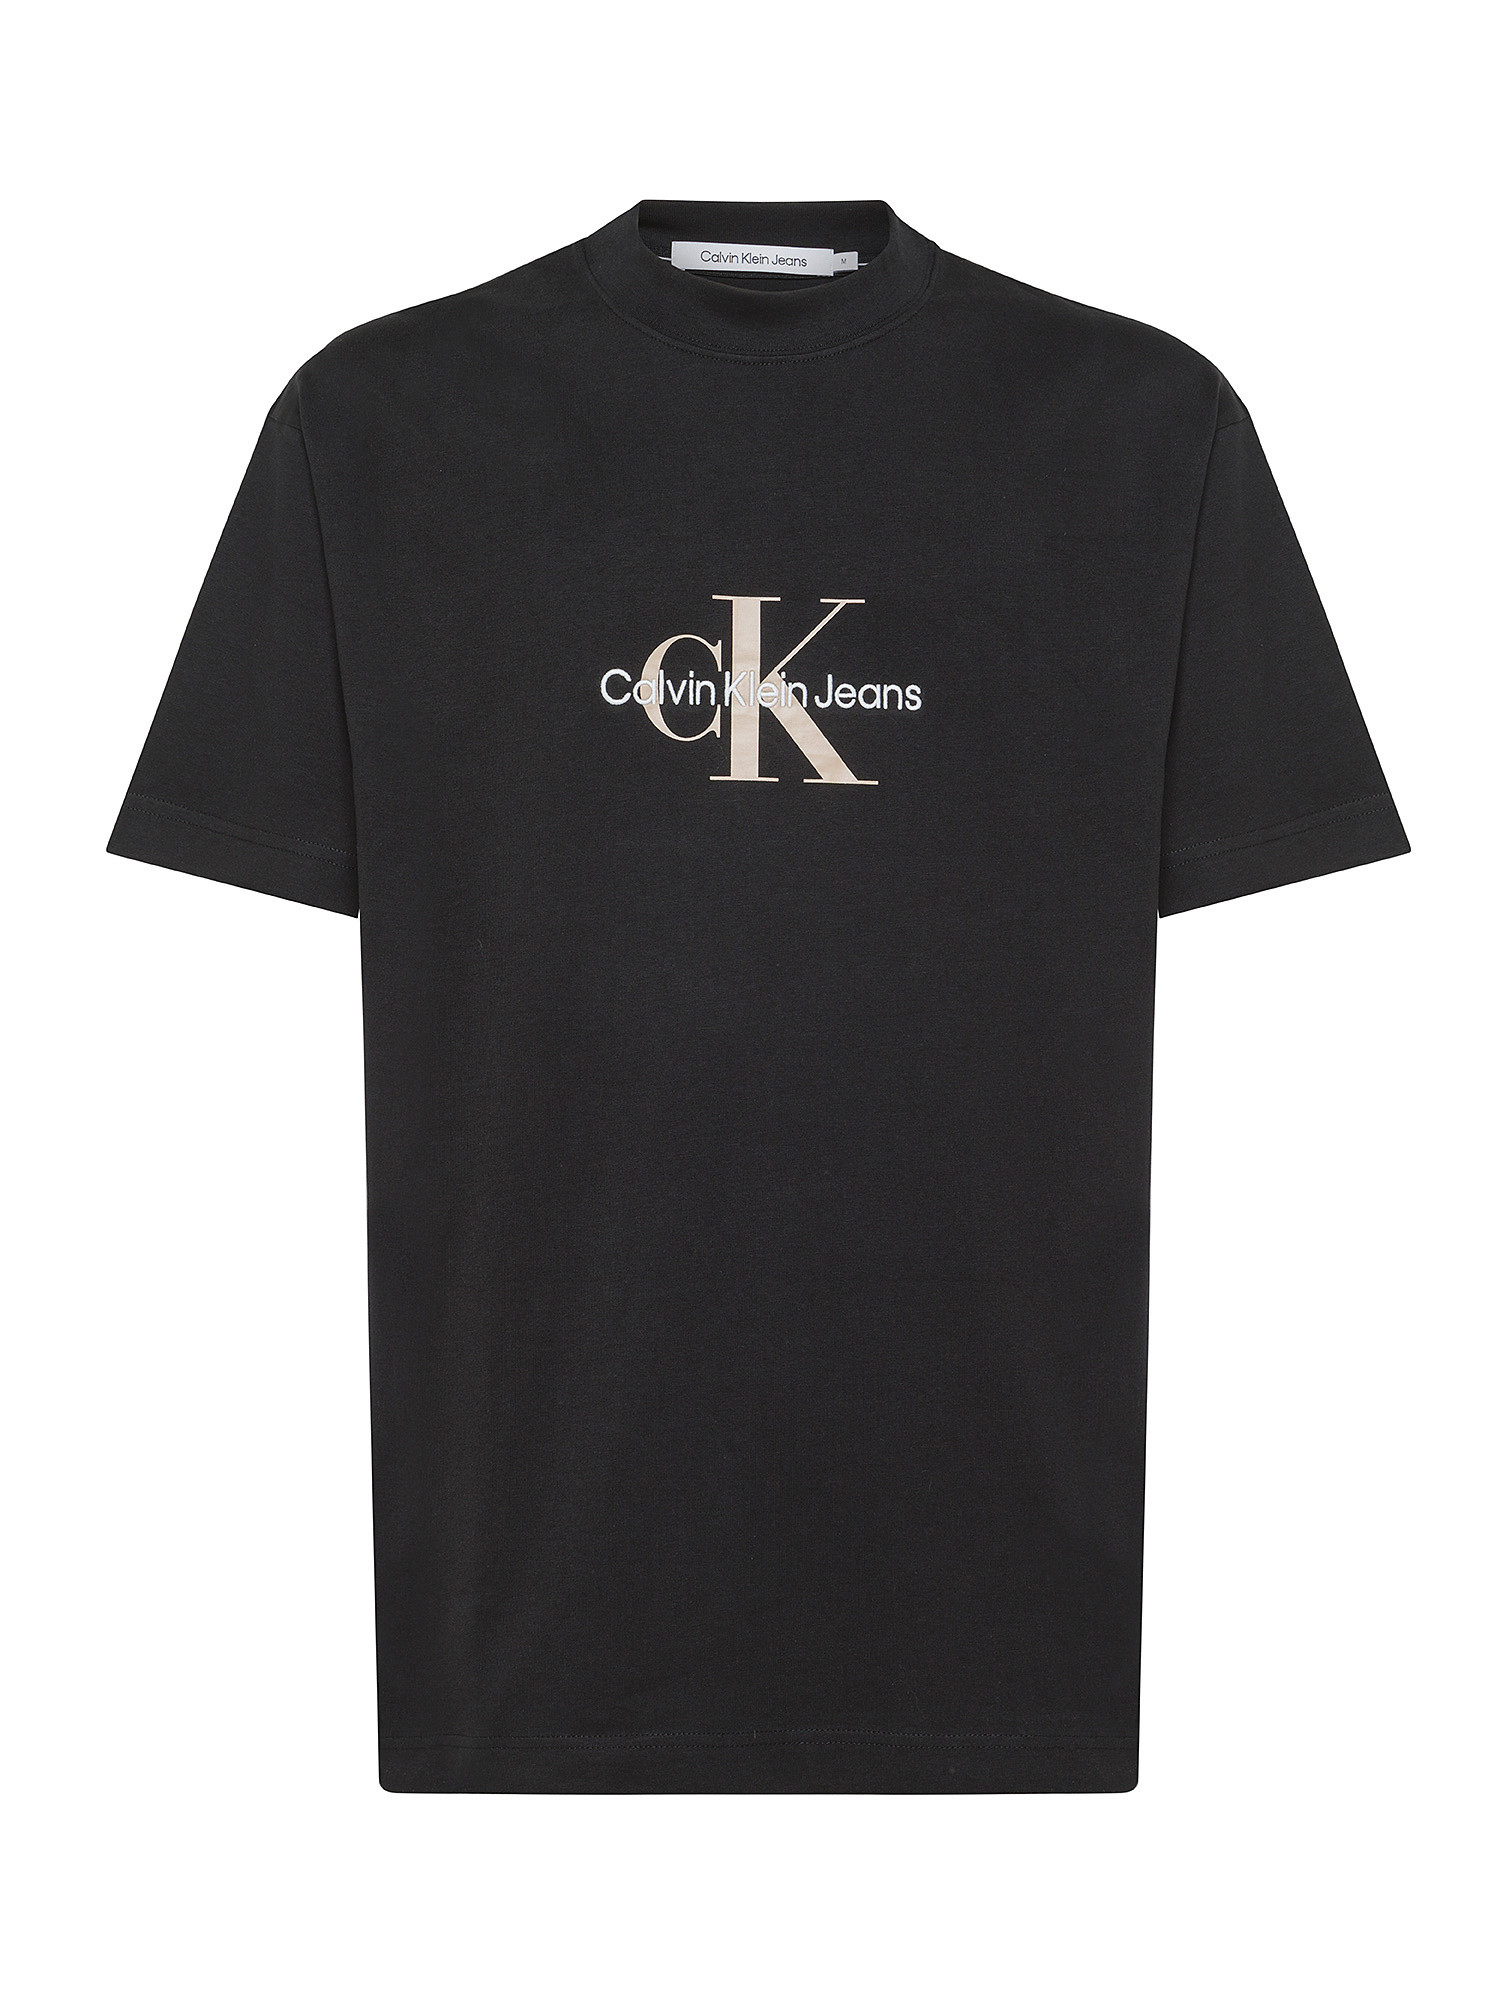 Calvin Klein Jeans - T-shirt oversize in cotone con logo, Nero, large image number 0